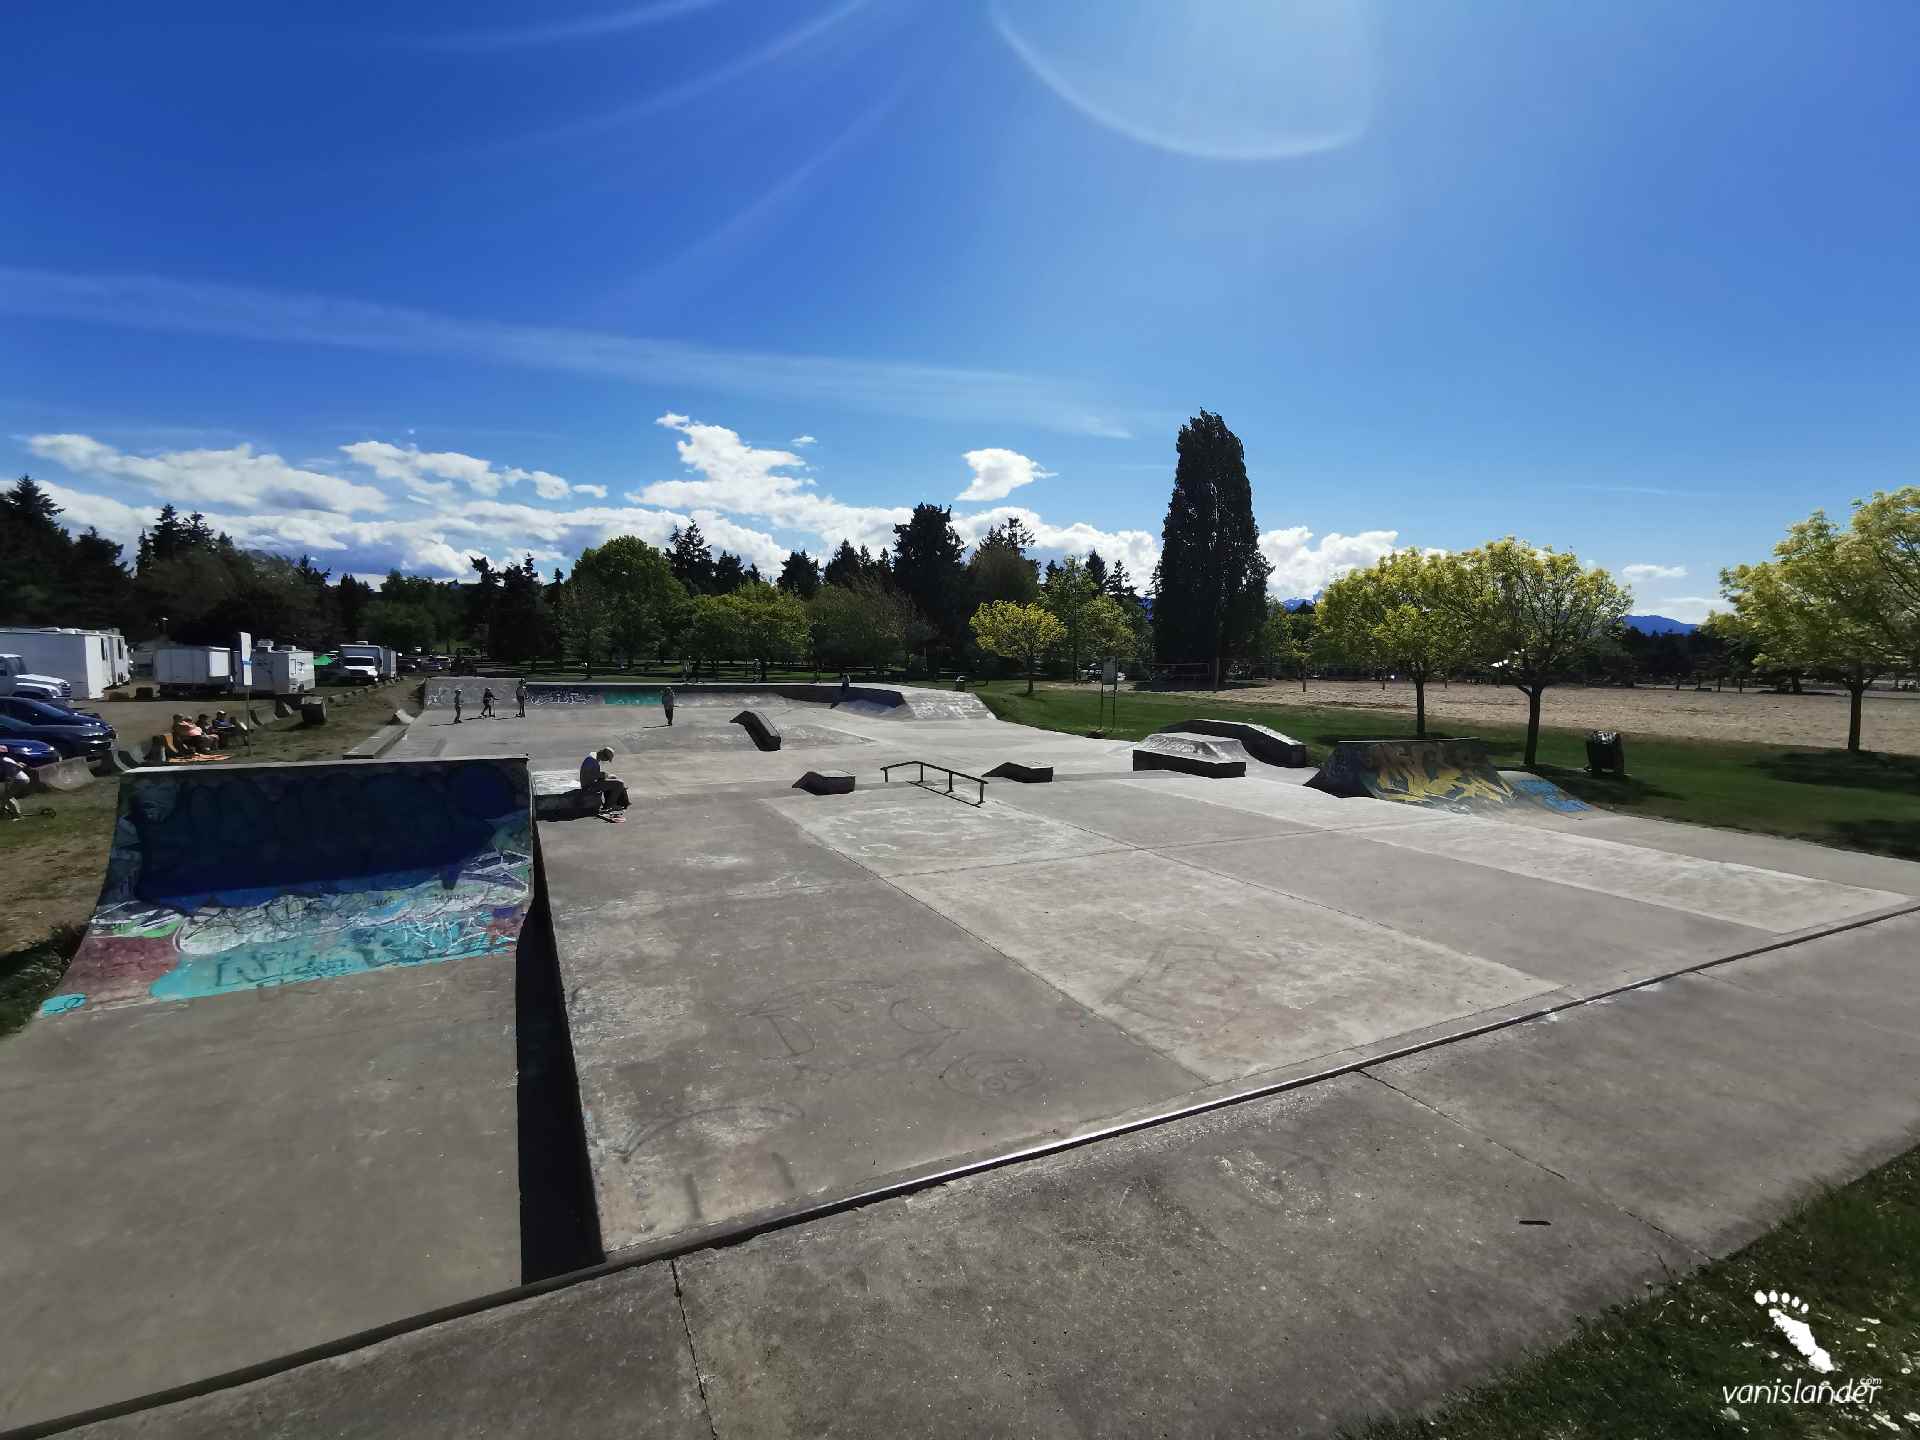 Skateboarding ground view in Parksville Community Beach Park, Vancouver Island.